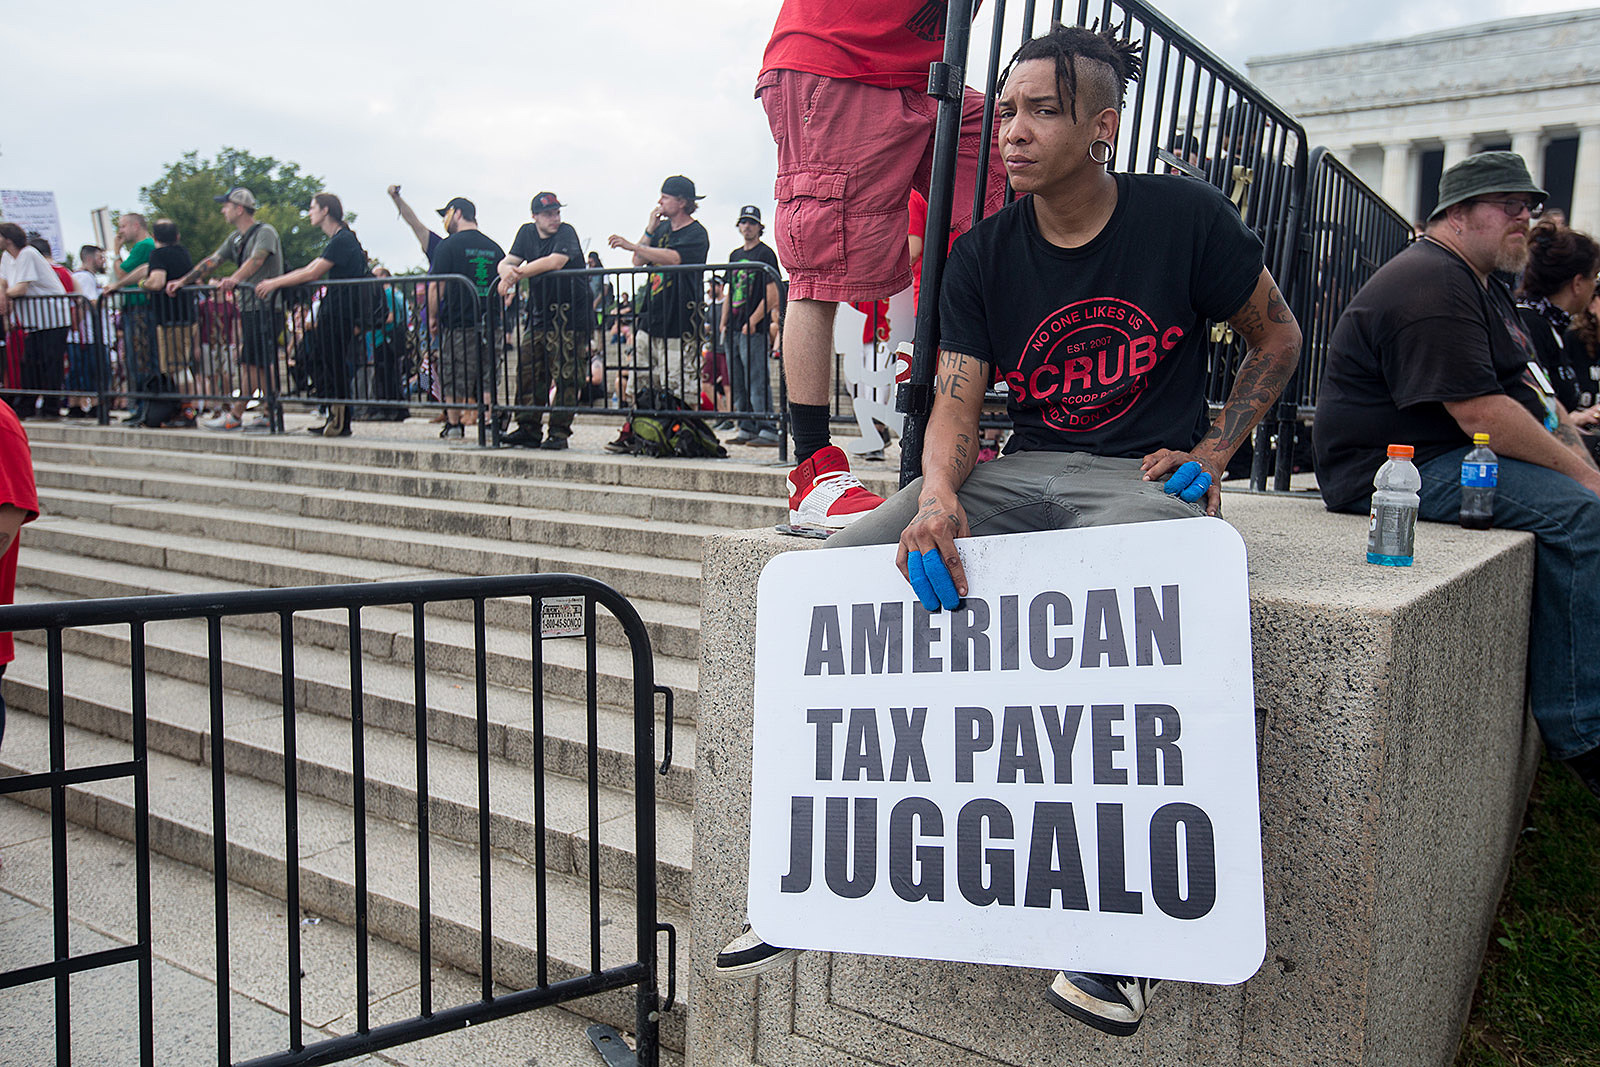 The March of the Juggalos